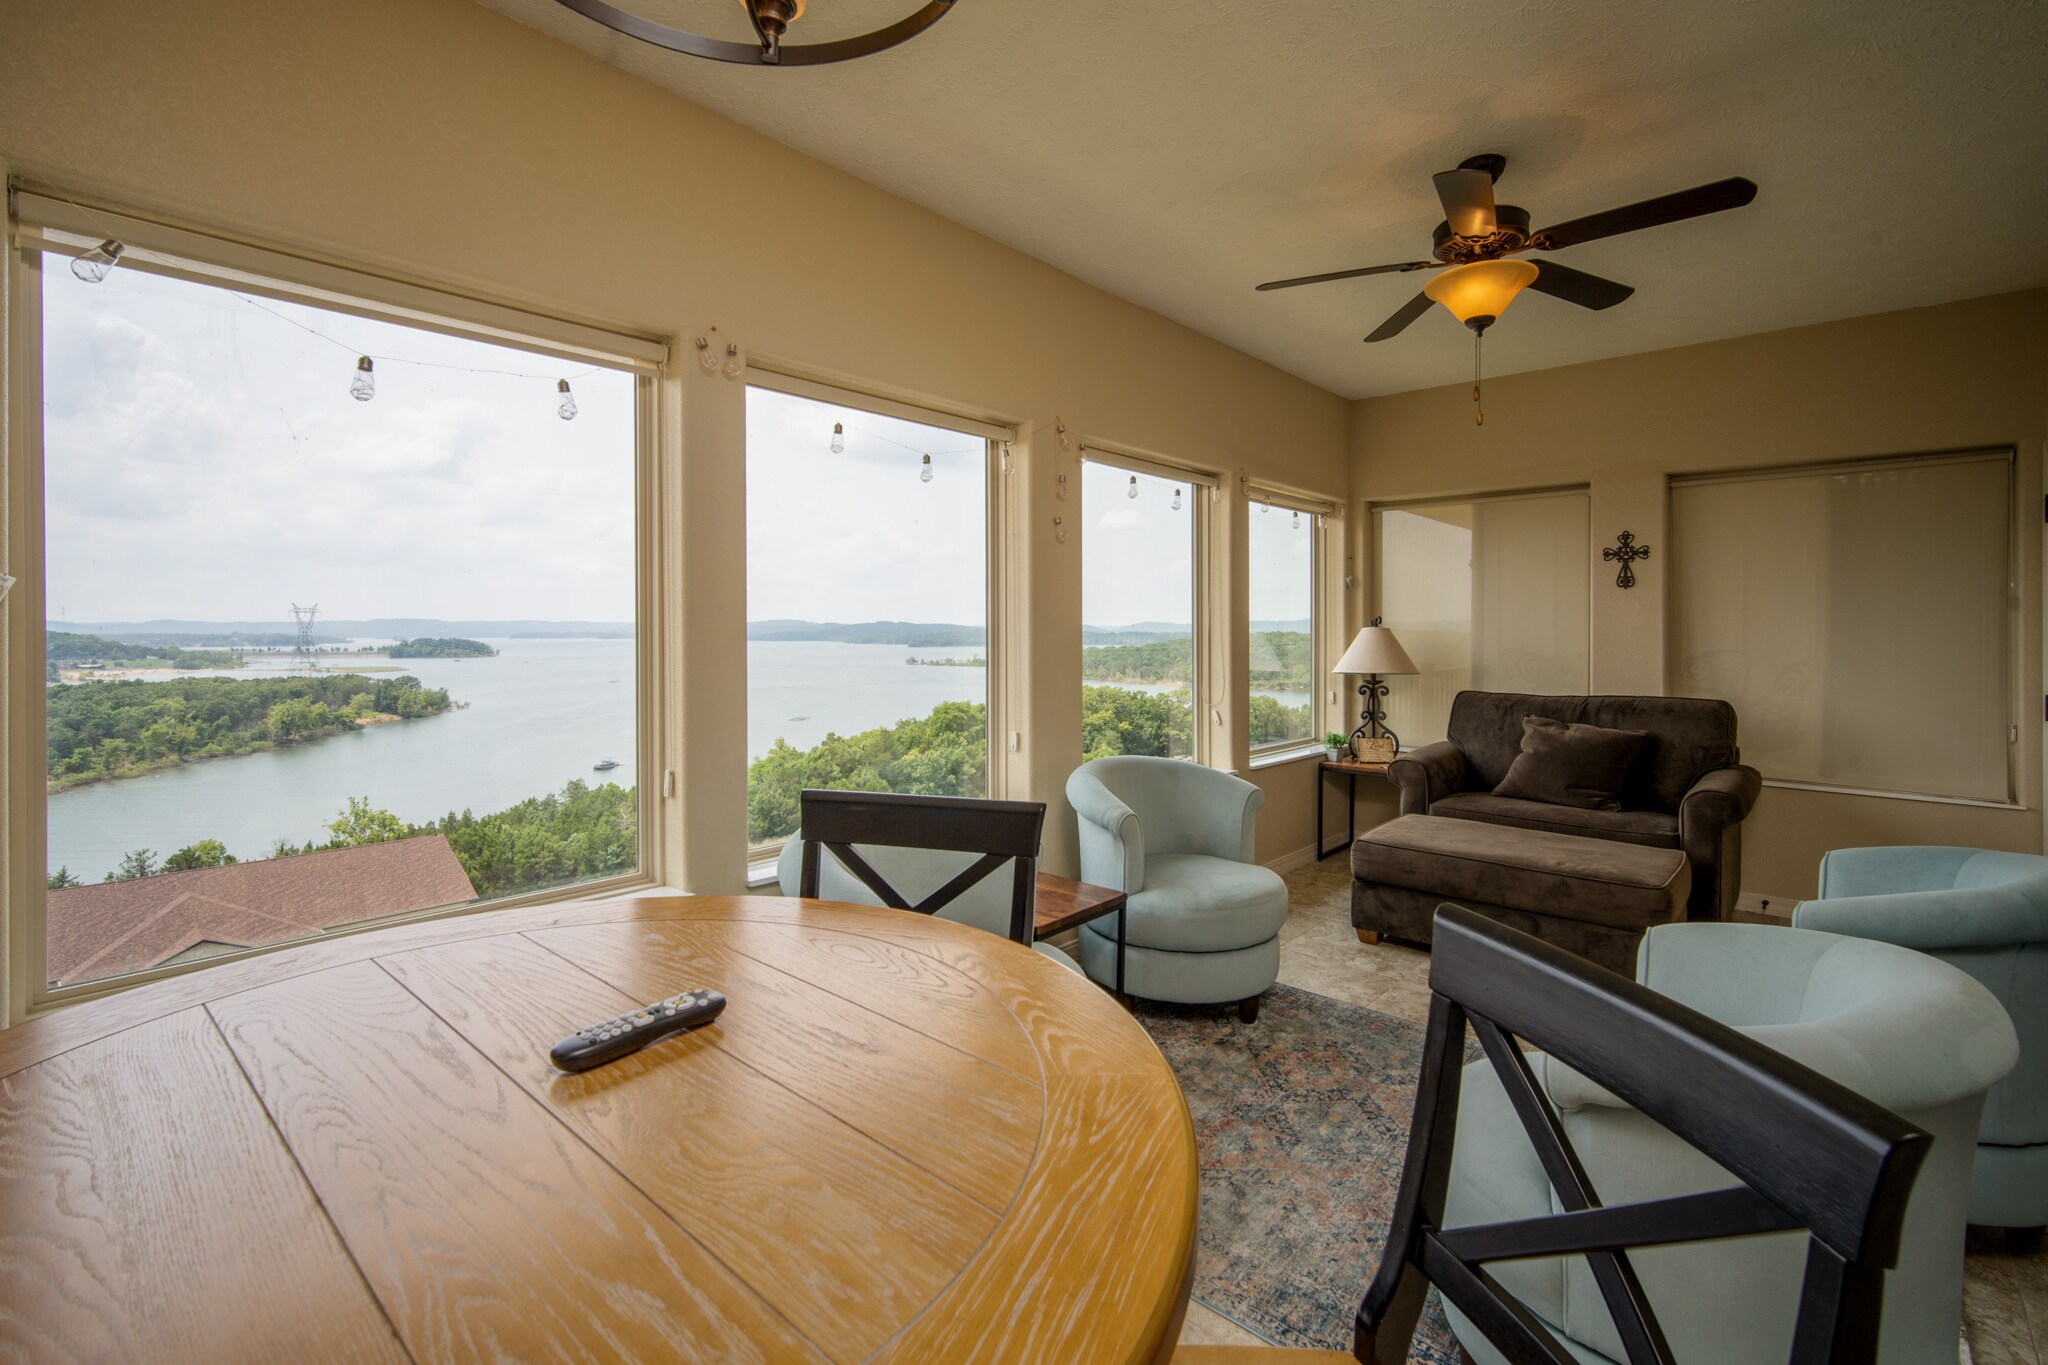 Beautiful Lake View from the All-Seasons Sunroom